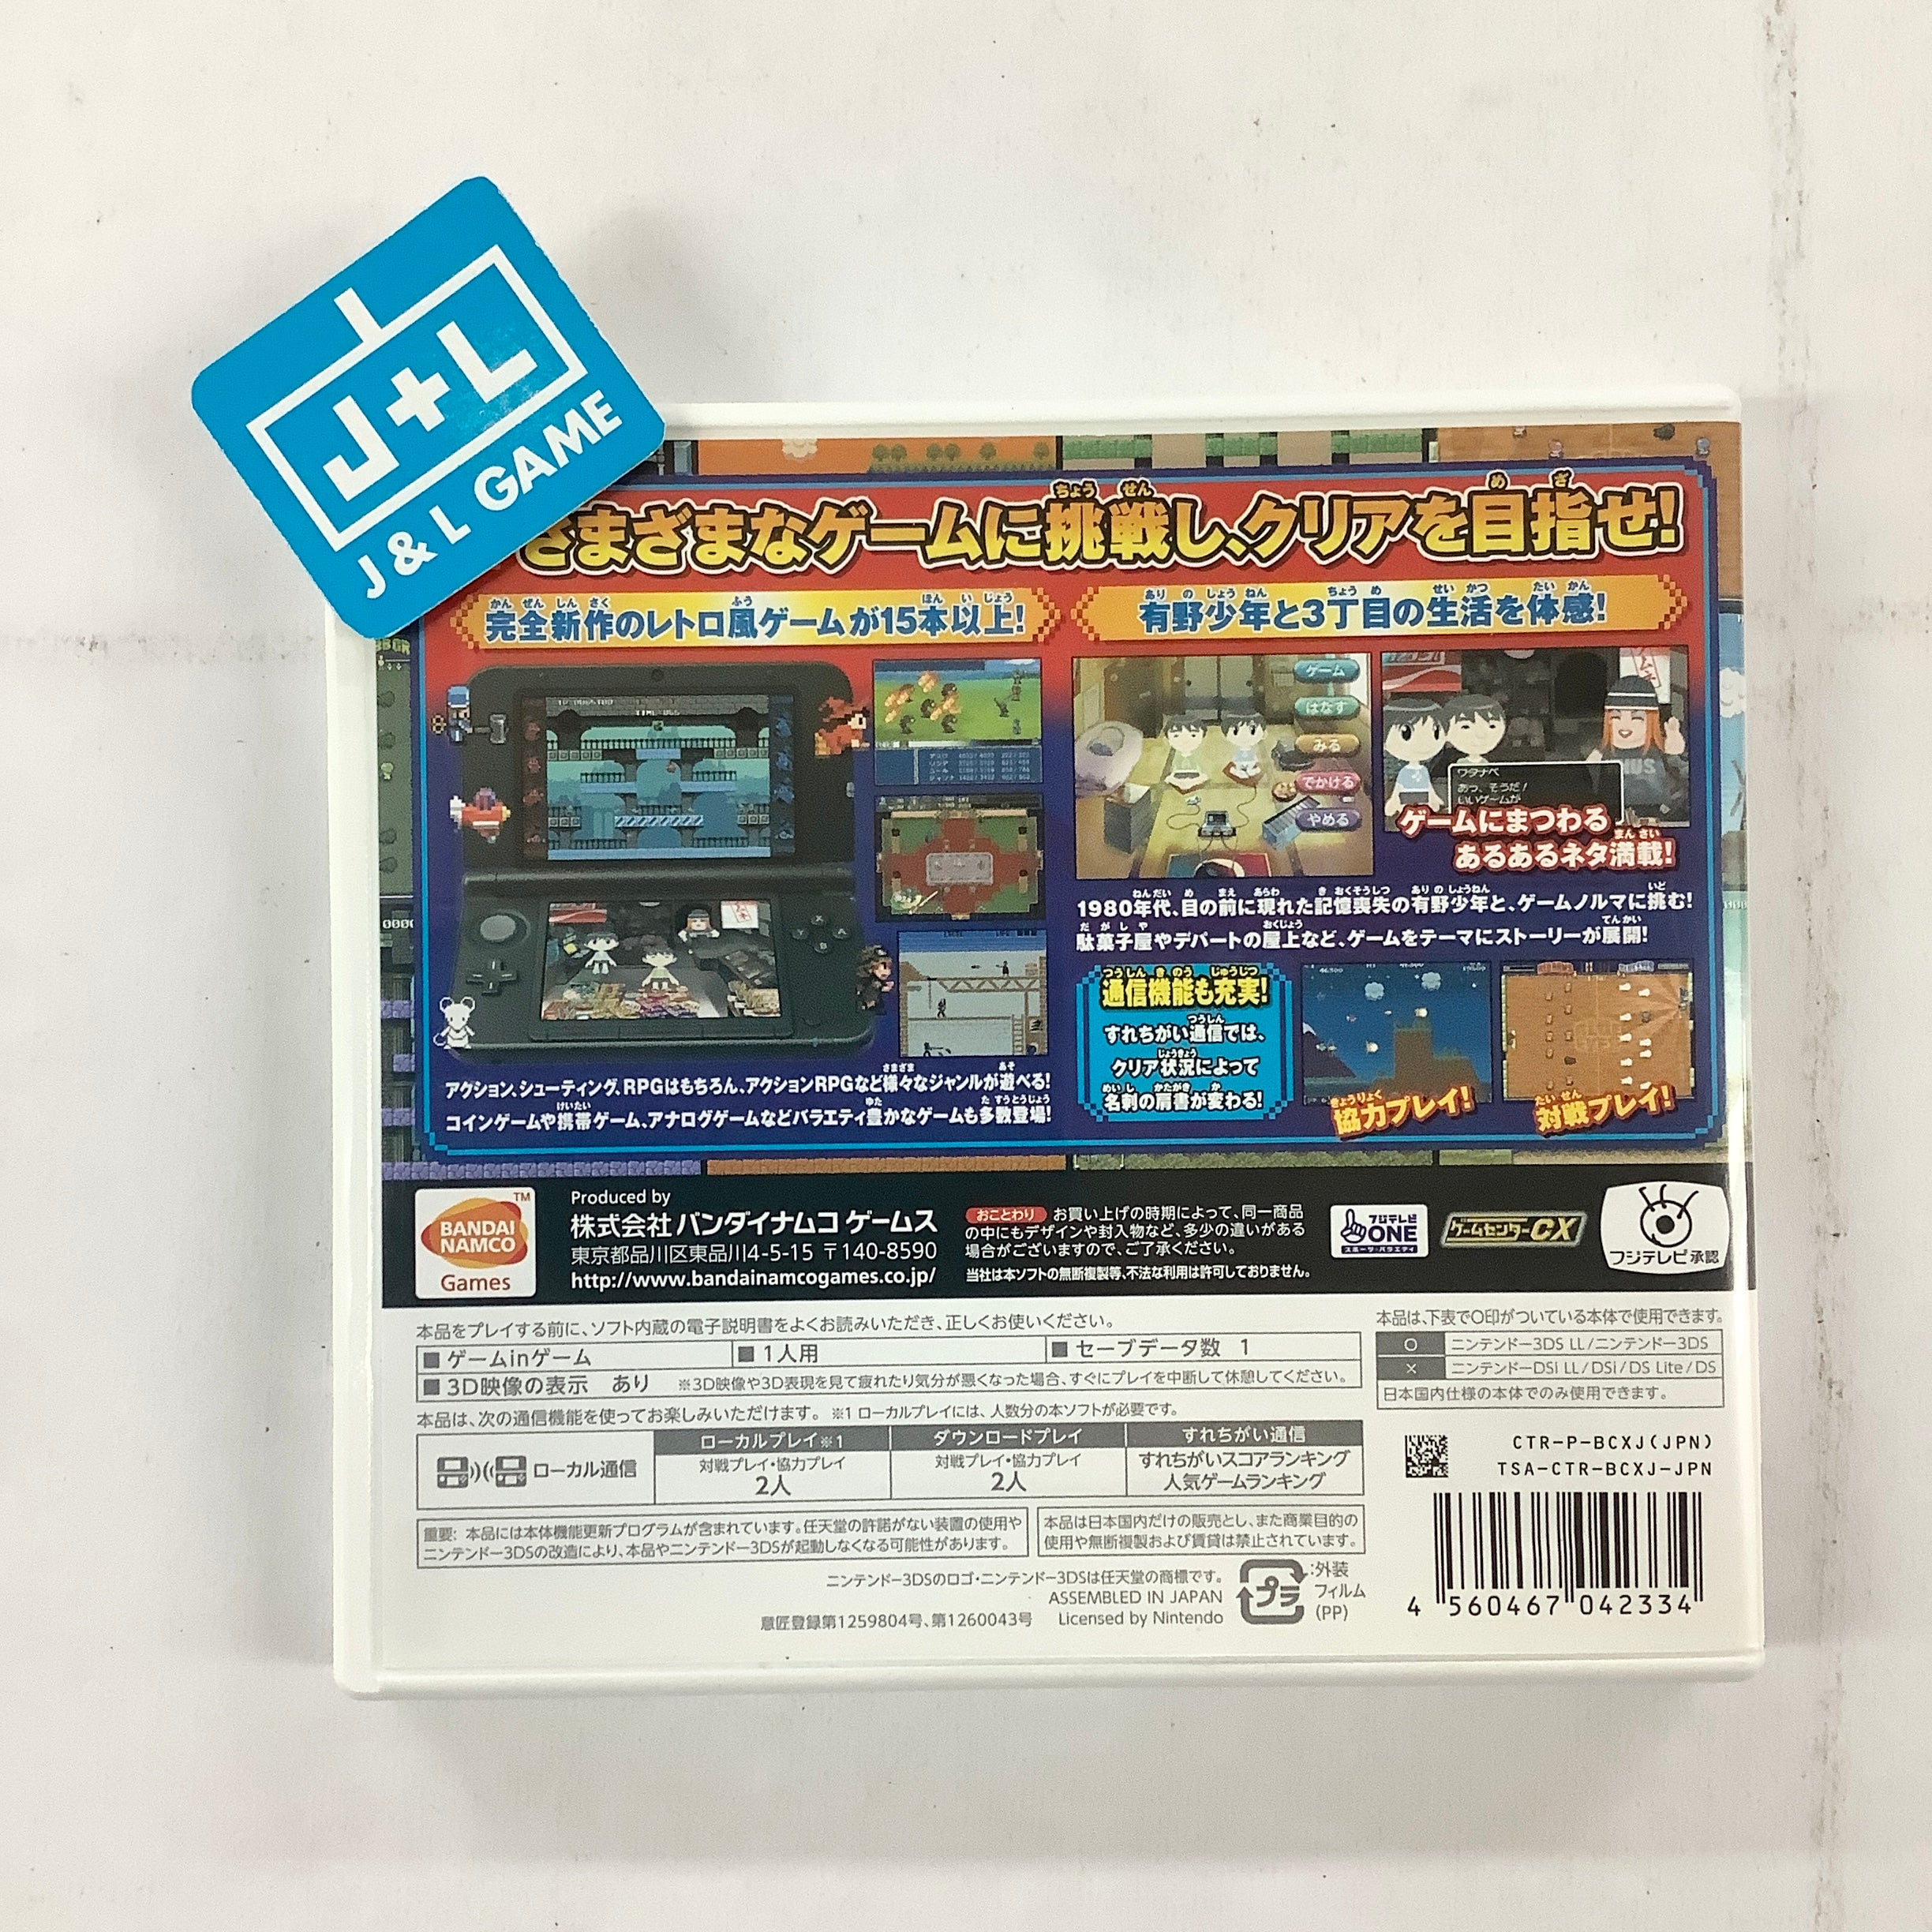 Game Center CX: 3-Choume no Arino - Nintendo 3DS [Pre-Owned] (Japanese Import) Video Games Bandai Namco Games   